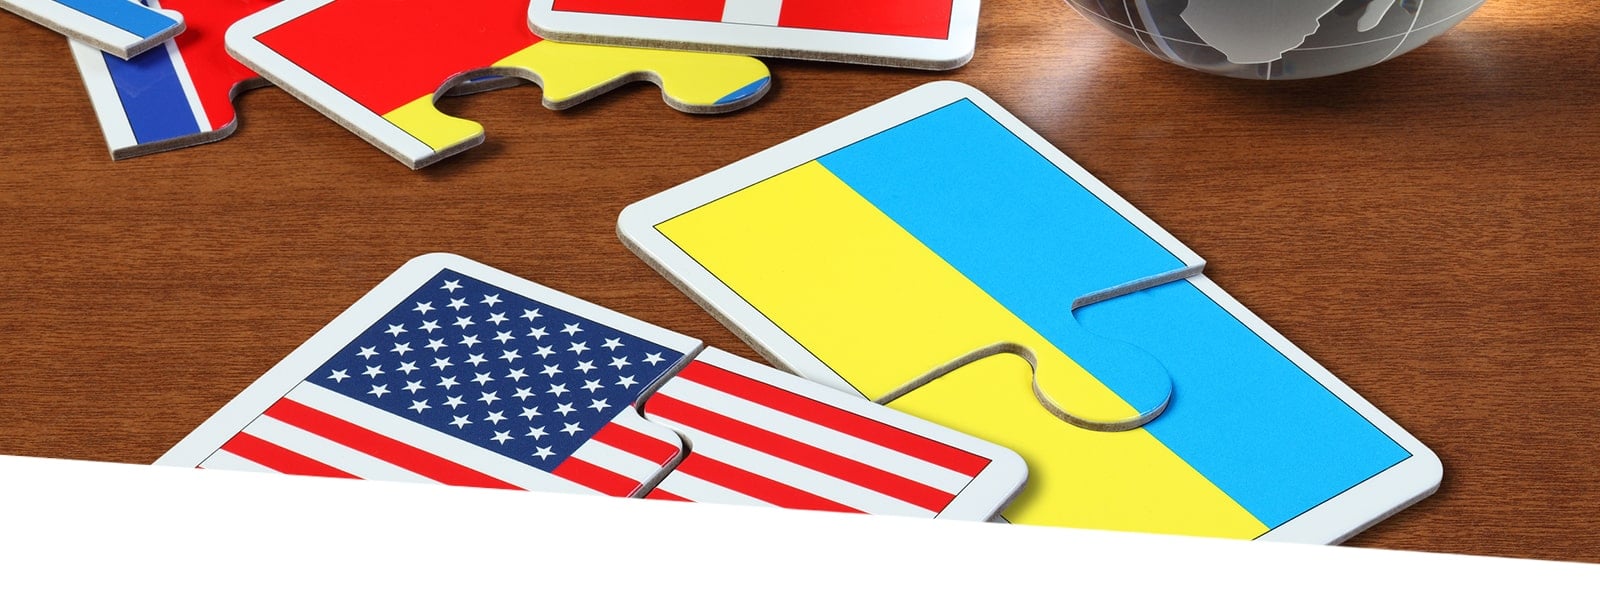 Puzzles of Ukraine and USA flags